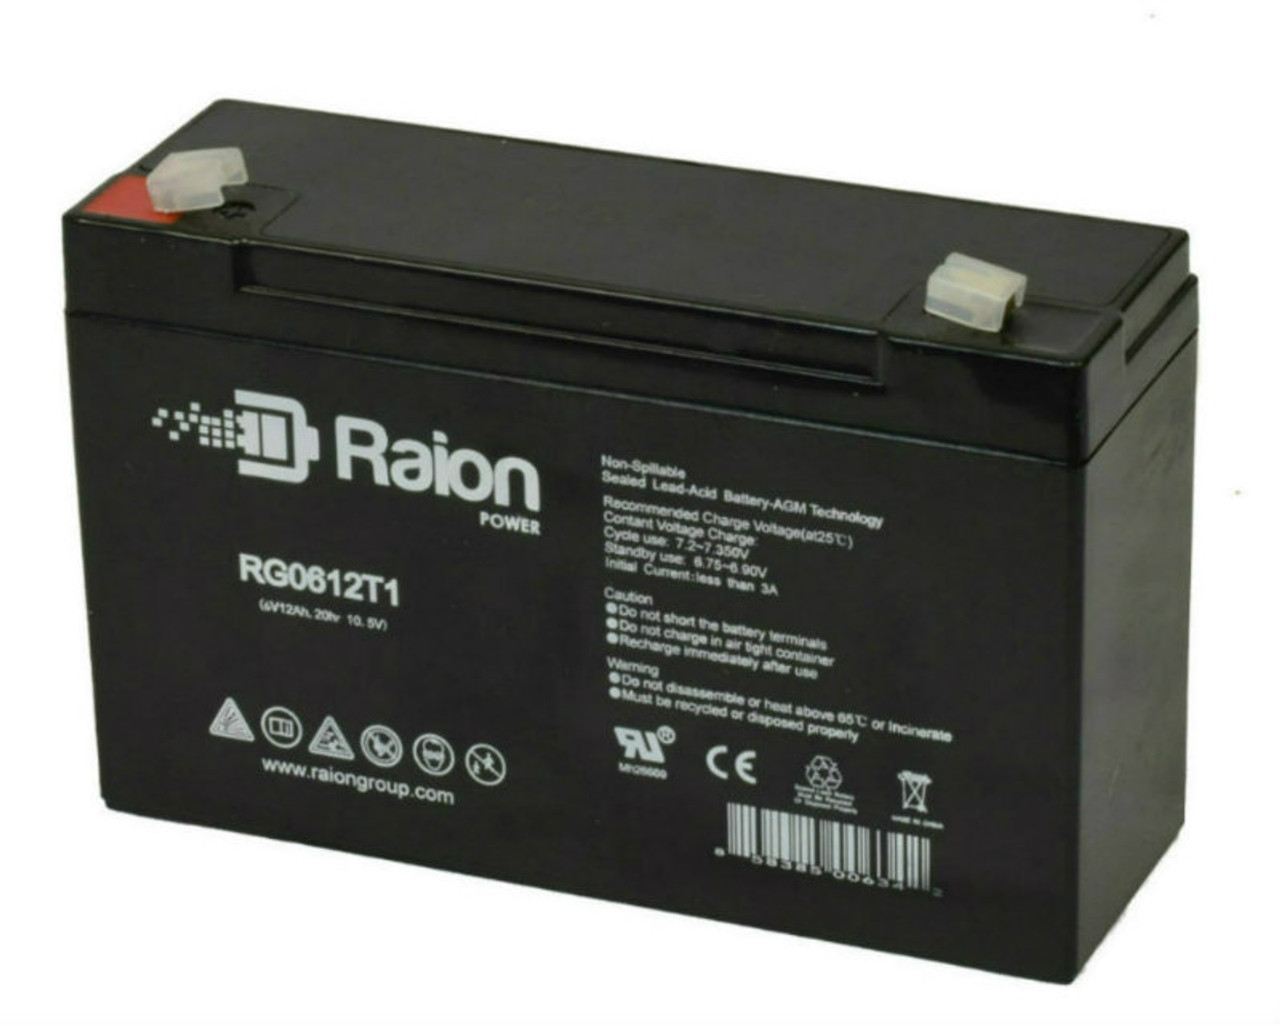 Raion Power RG06120T1 6V 12Ah Replacement UPS Battery Cartridge for Minuteman A 500/2